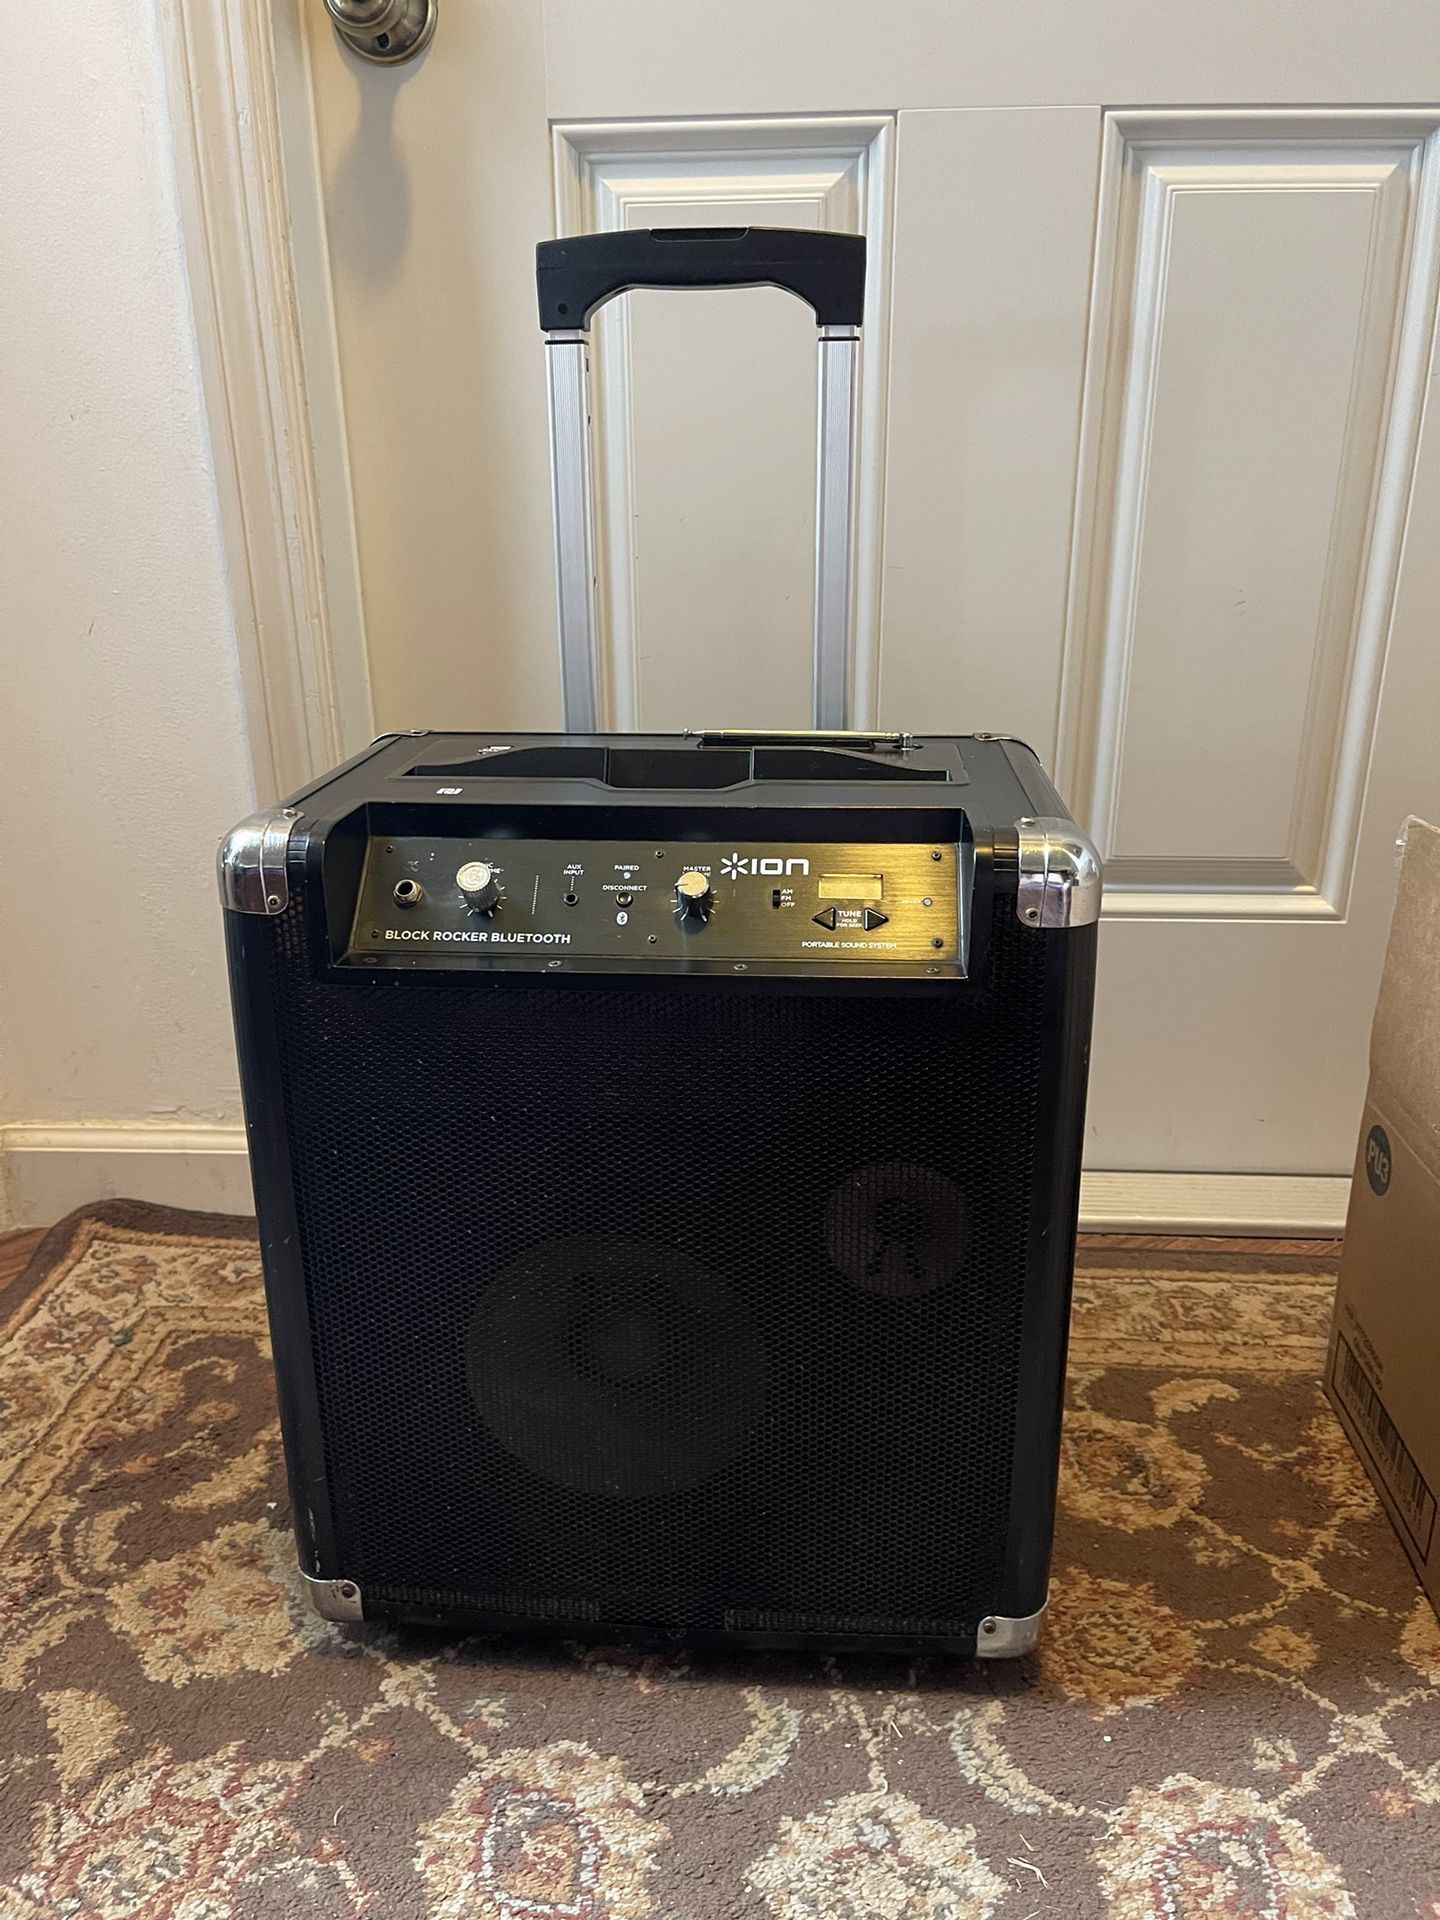 ION Block Rocker Bluetooth Portable Speaker In Working Condition $80 Firm On Price